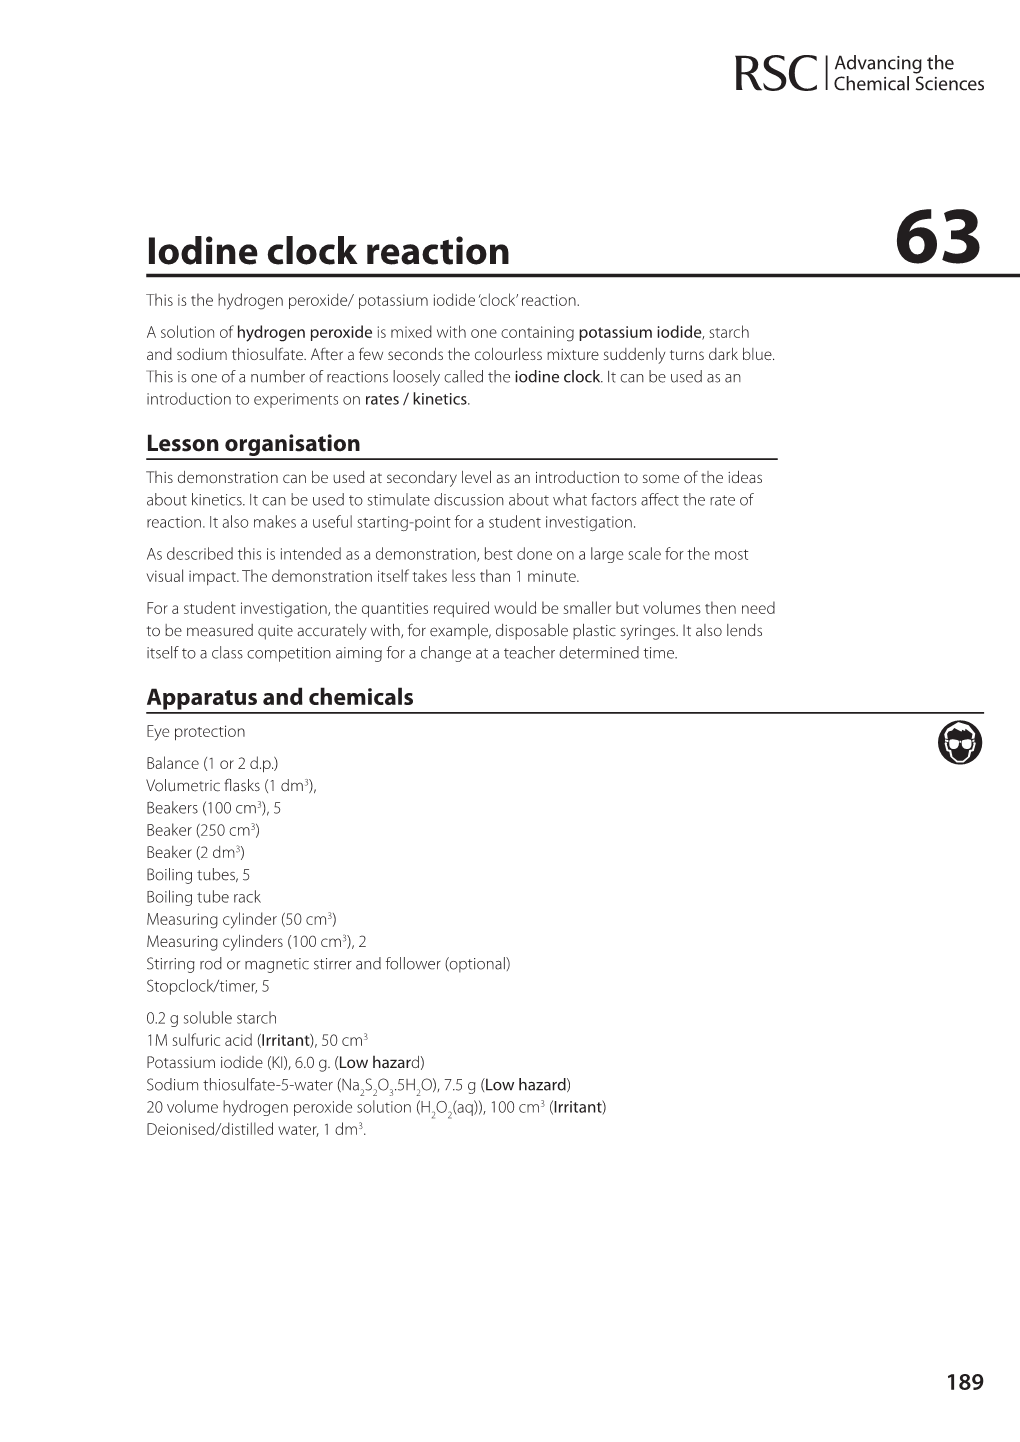 Iodine Clock Reaction 63 This Is the Hydrogen Peroxide/ Potassium Iodide ‘Clock’ Reaction